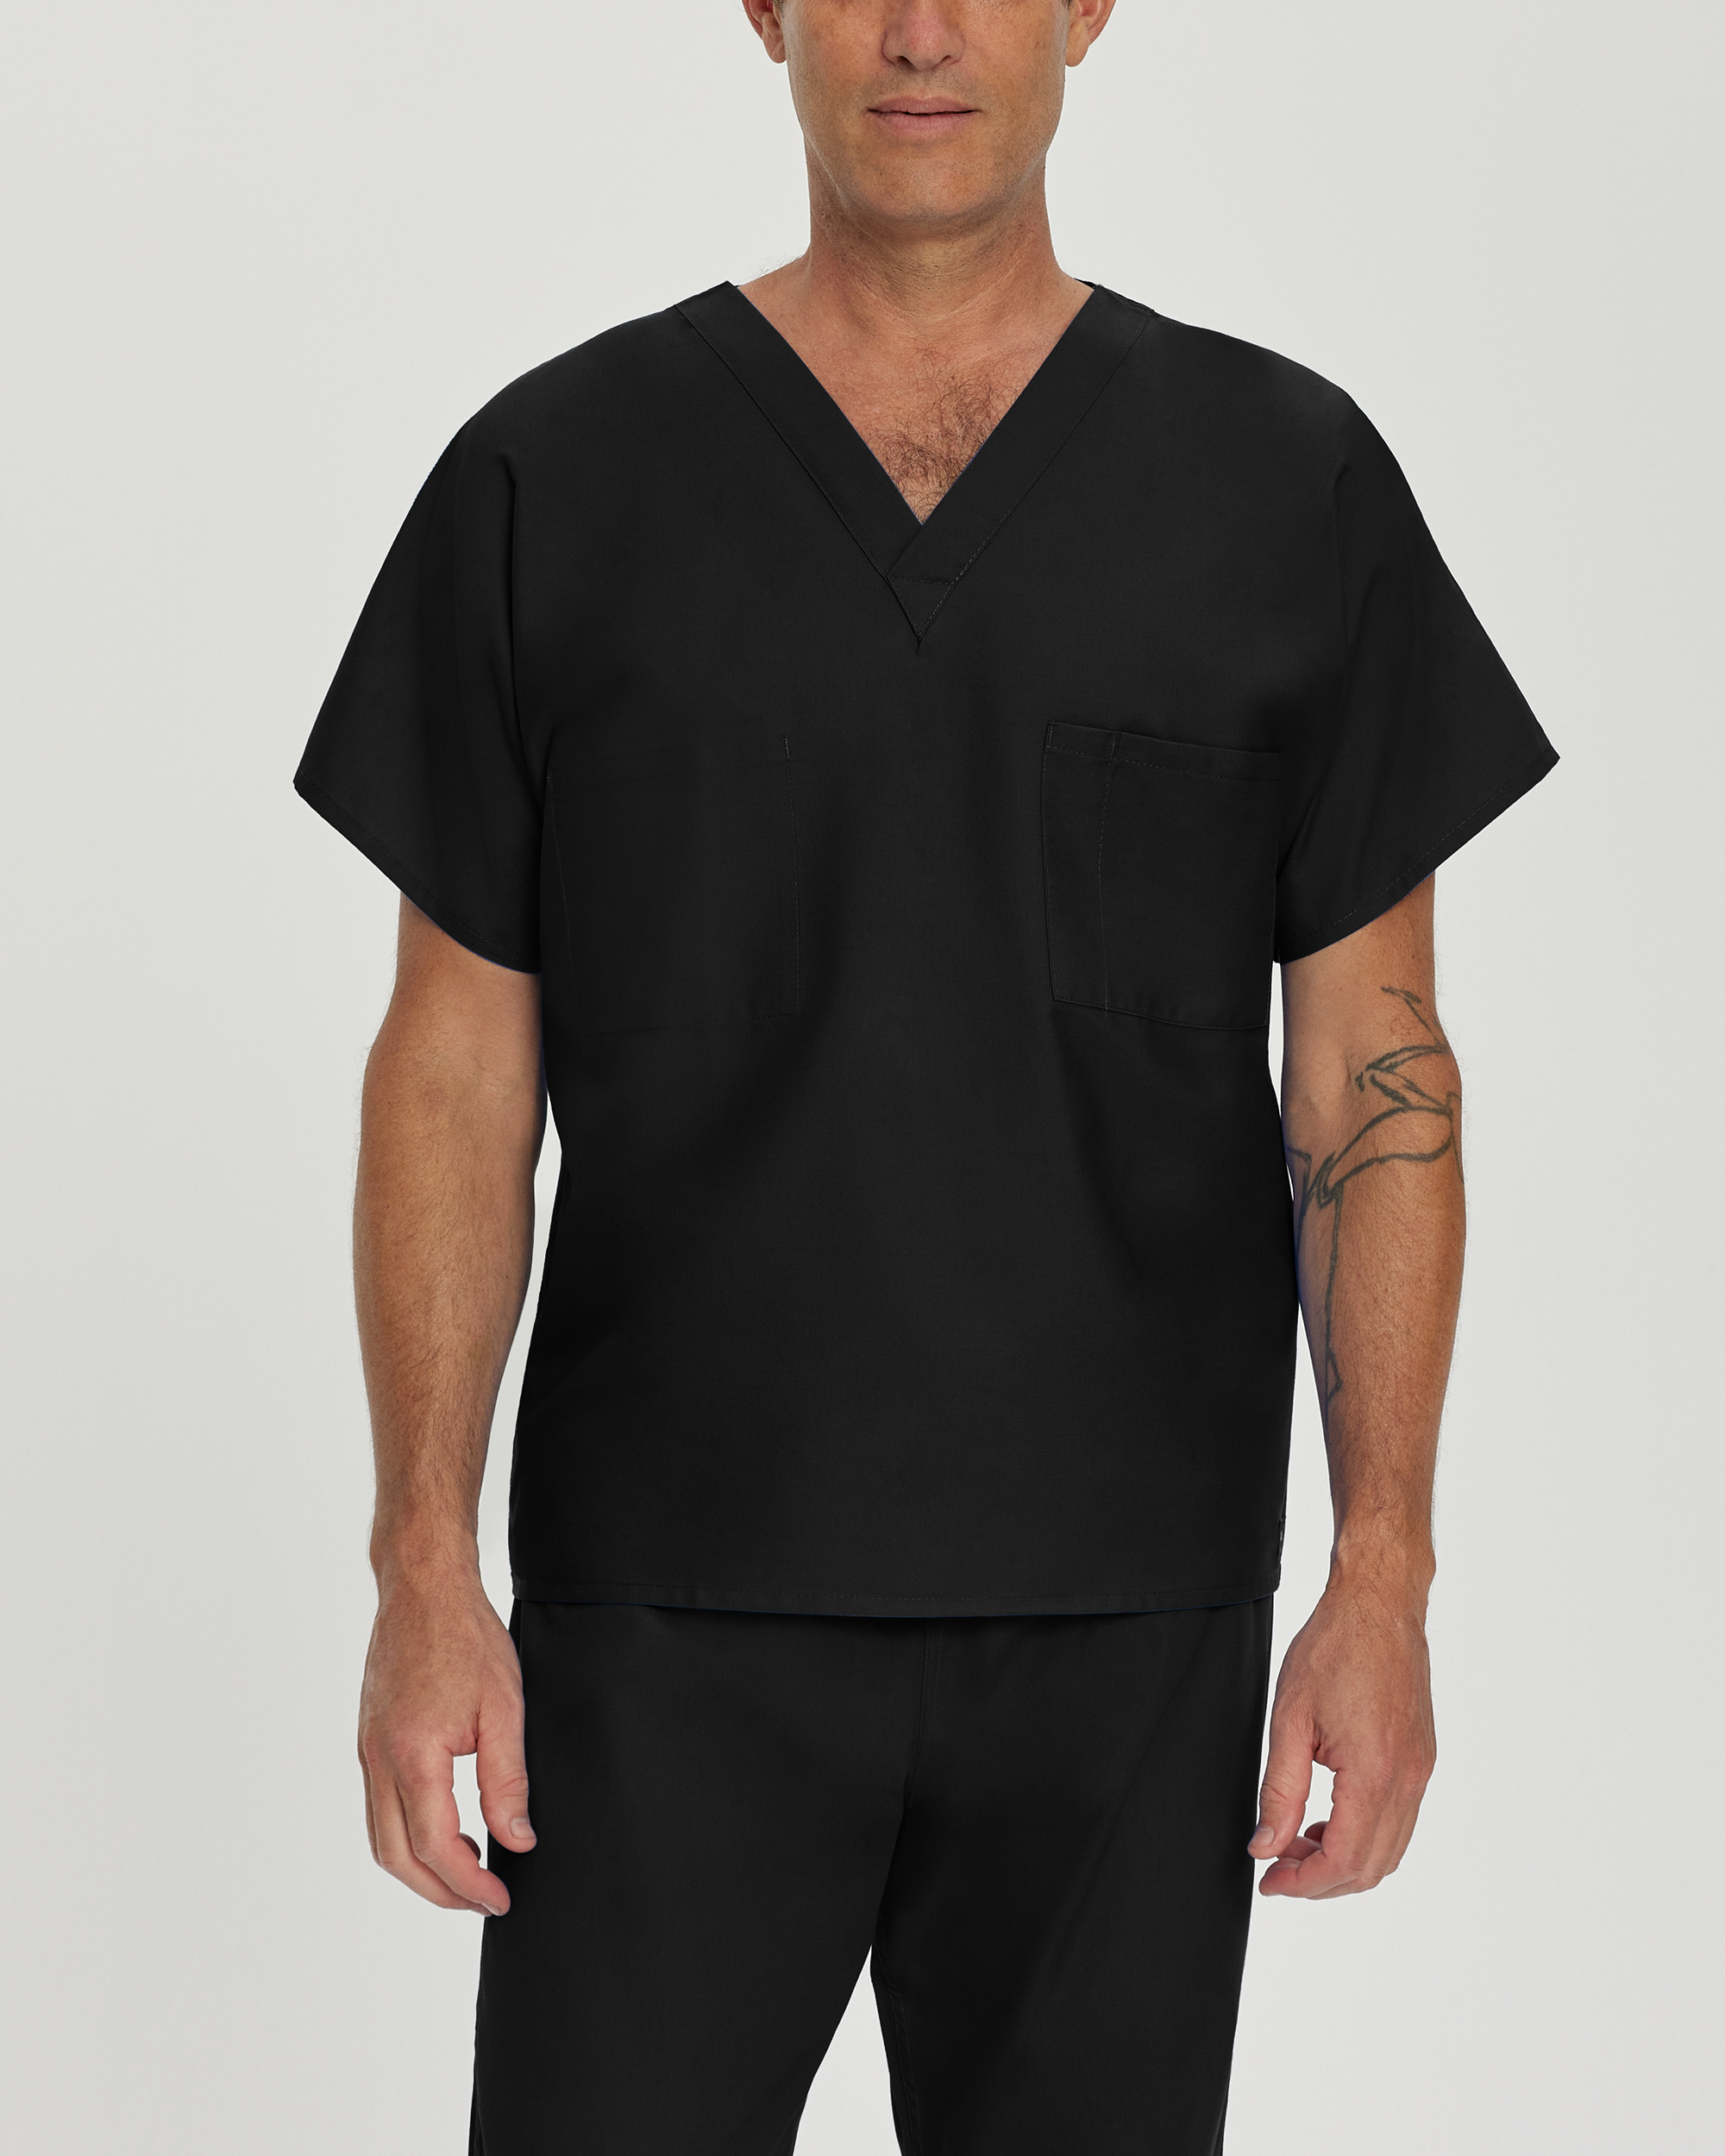 What features does the Landau 7502 scrub top have?